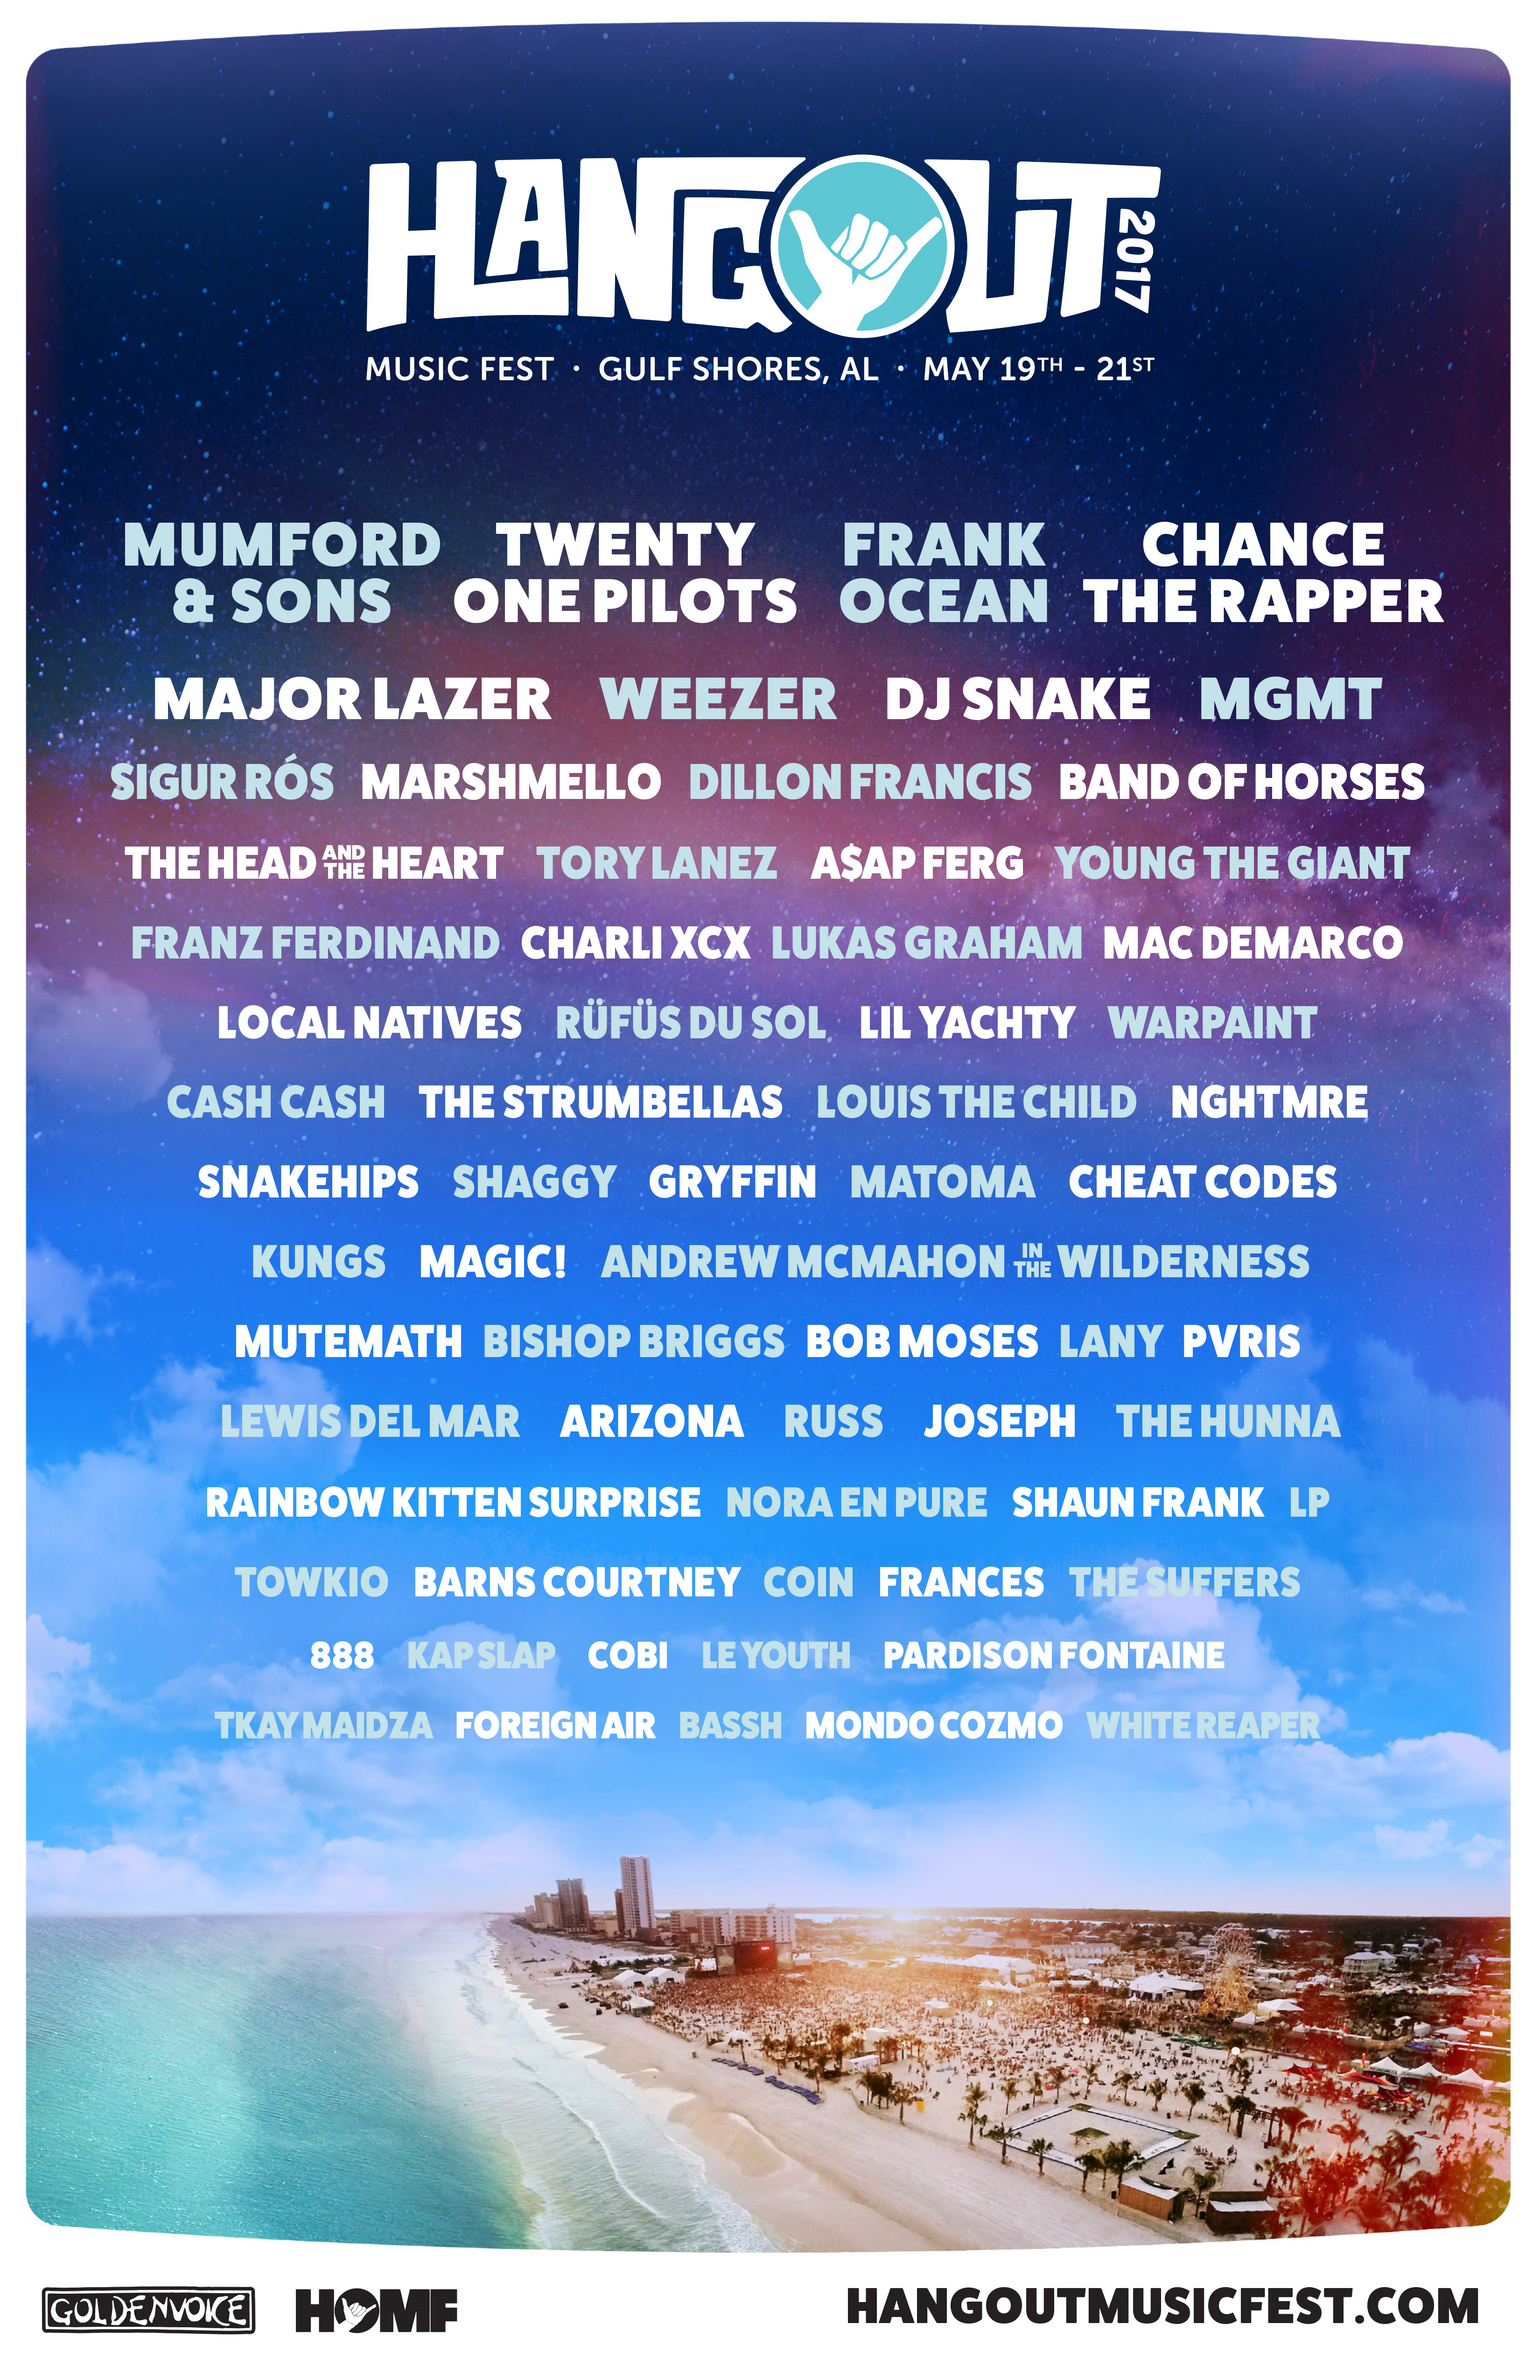 Hangout Music Festival 2017 Lineup: Frank Ocean, Mumford & Sons, Chance the Rapper, and More